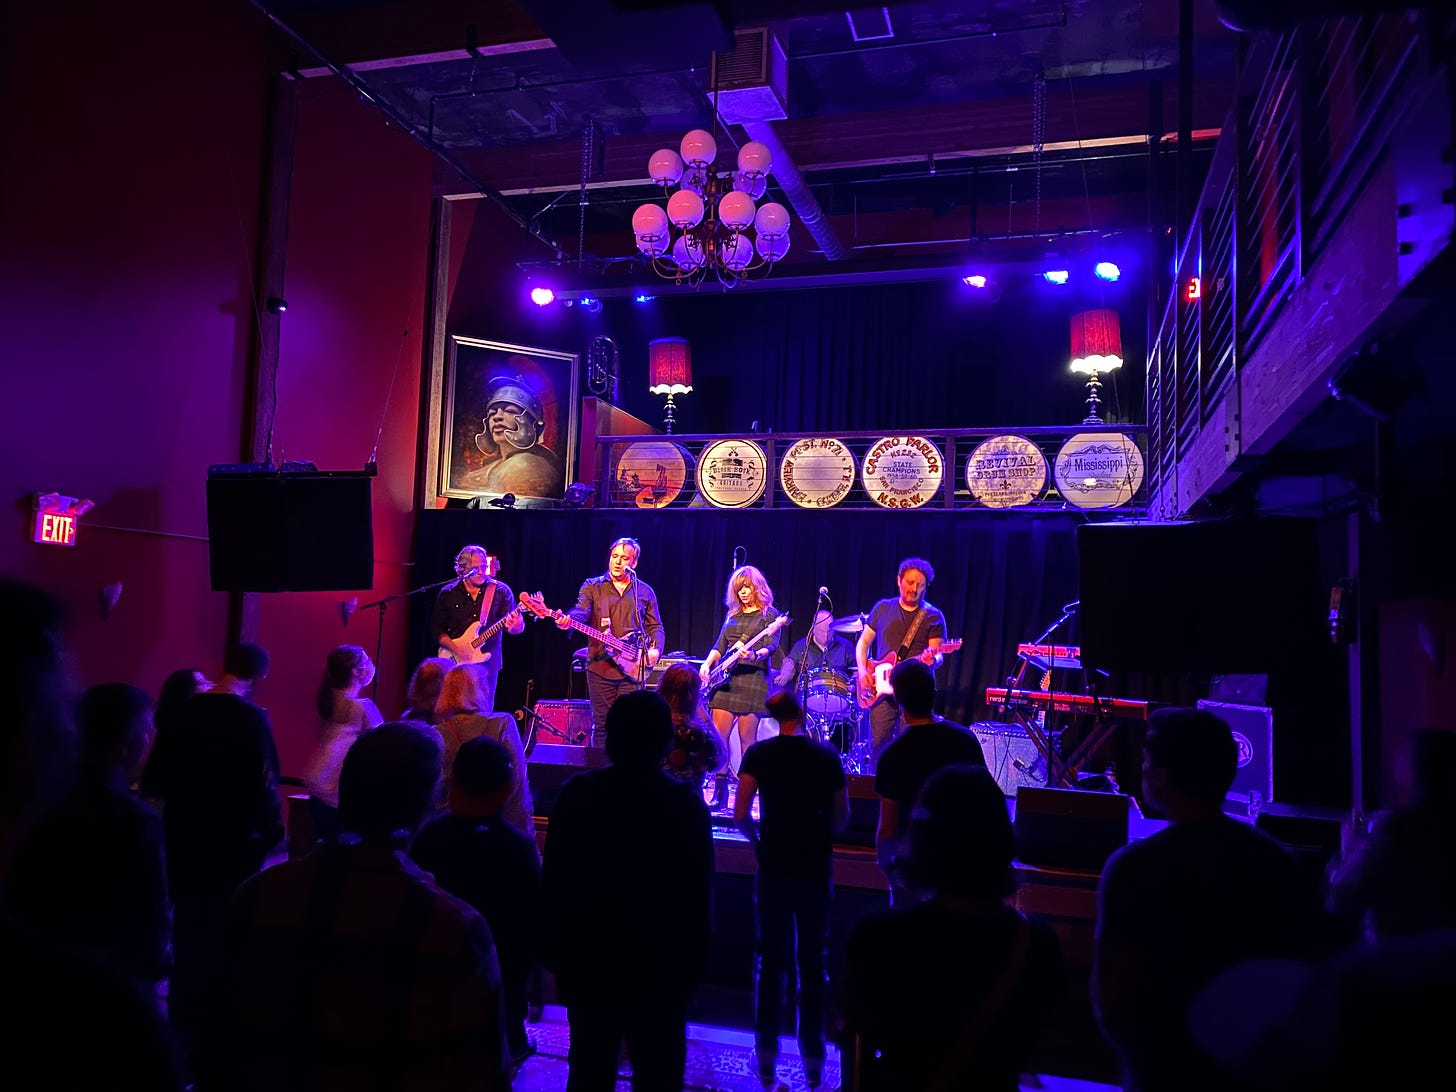 The band Aeon Station plays, bathed in purple light, at Mississippi Studios in Portland, Oregon on Sept. 23, 2020. 